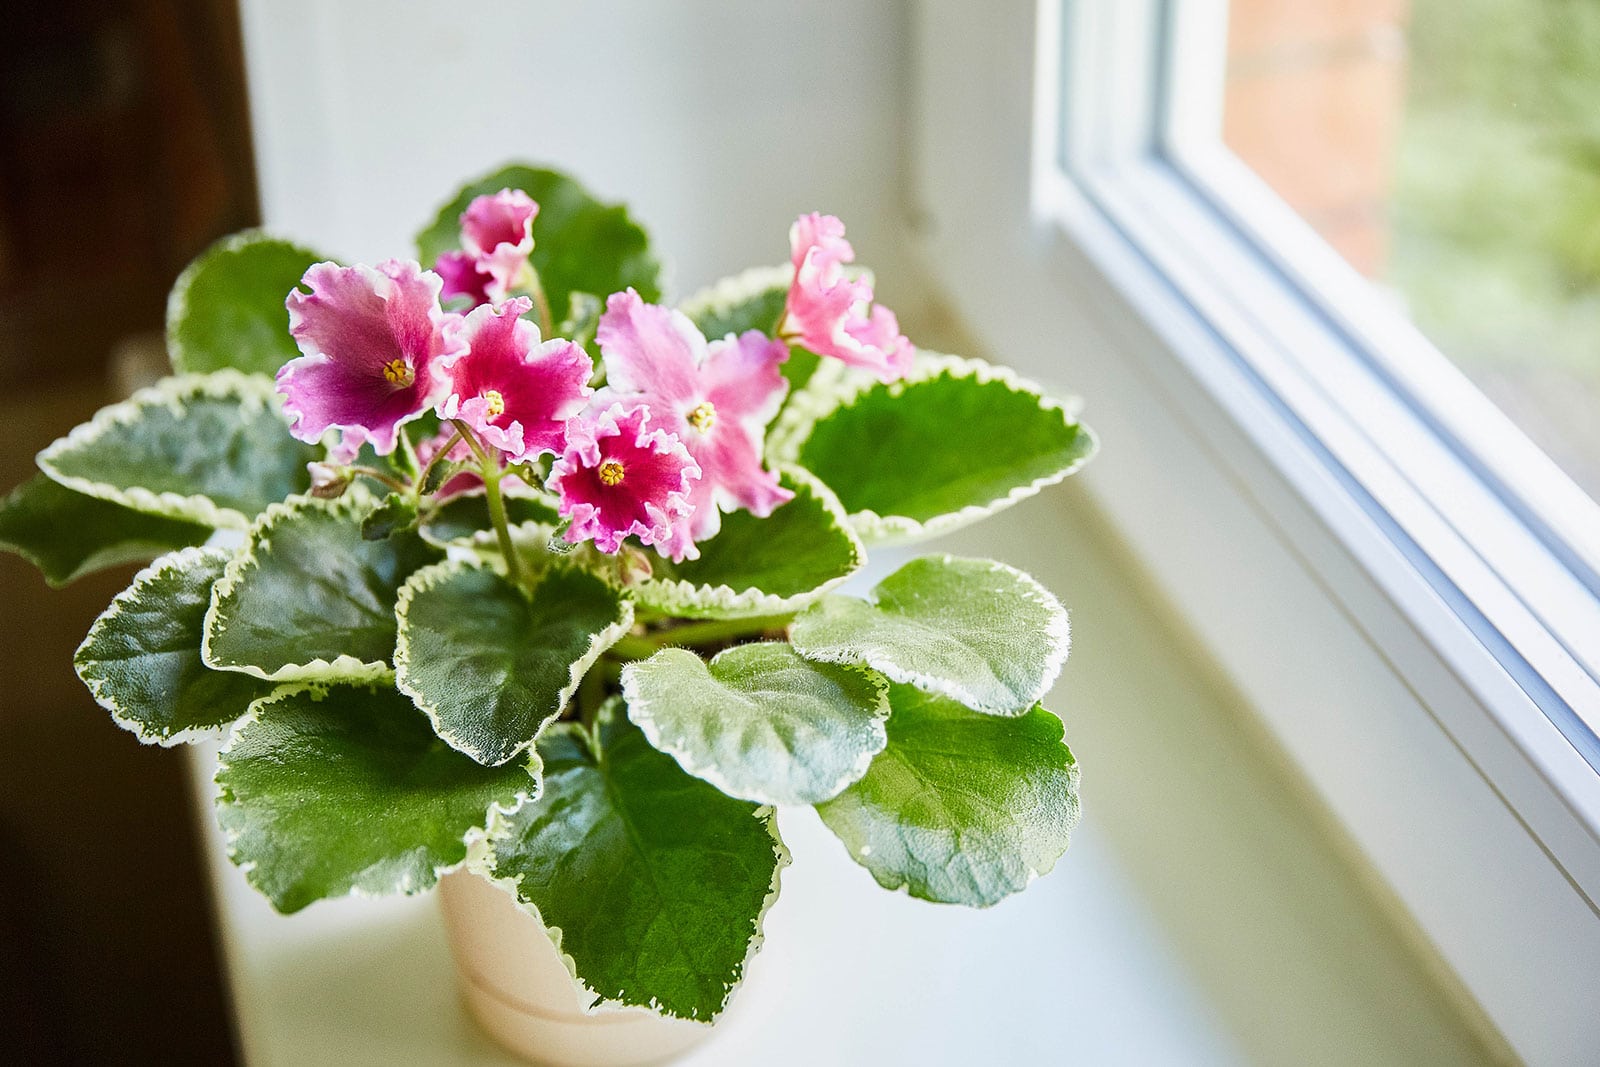 African violet houseplant with ruffled pink flowers in a white pot sitting on a sunny windowsill